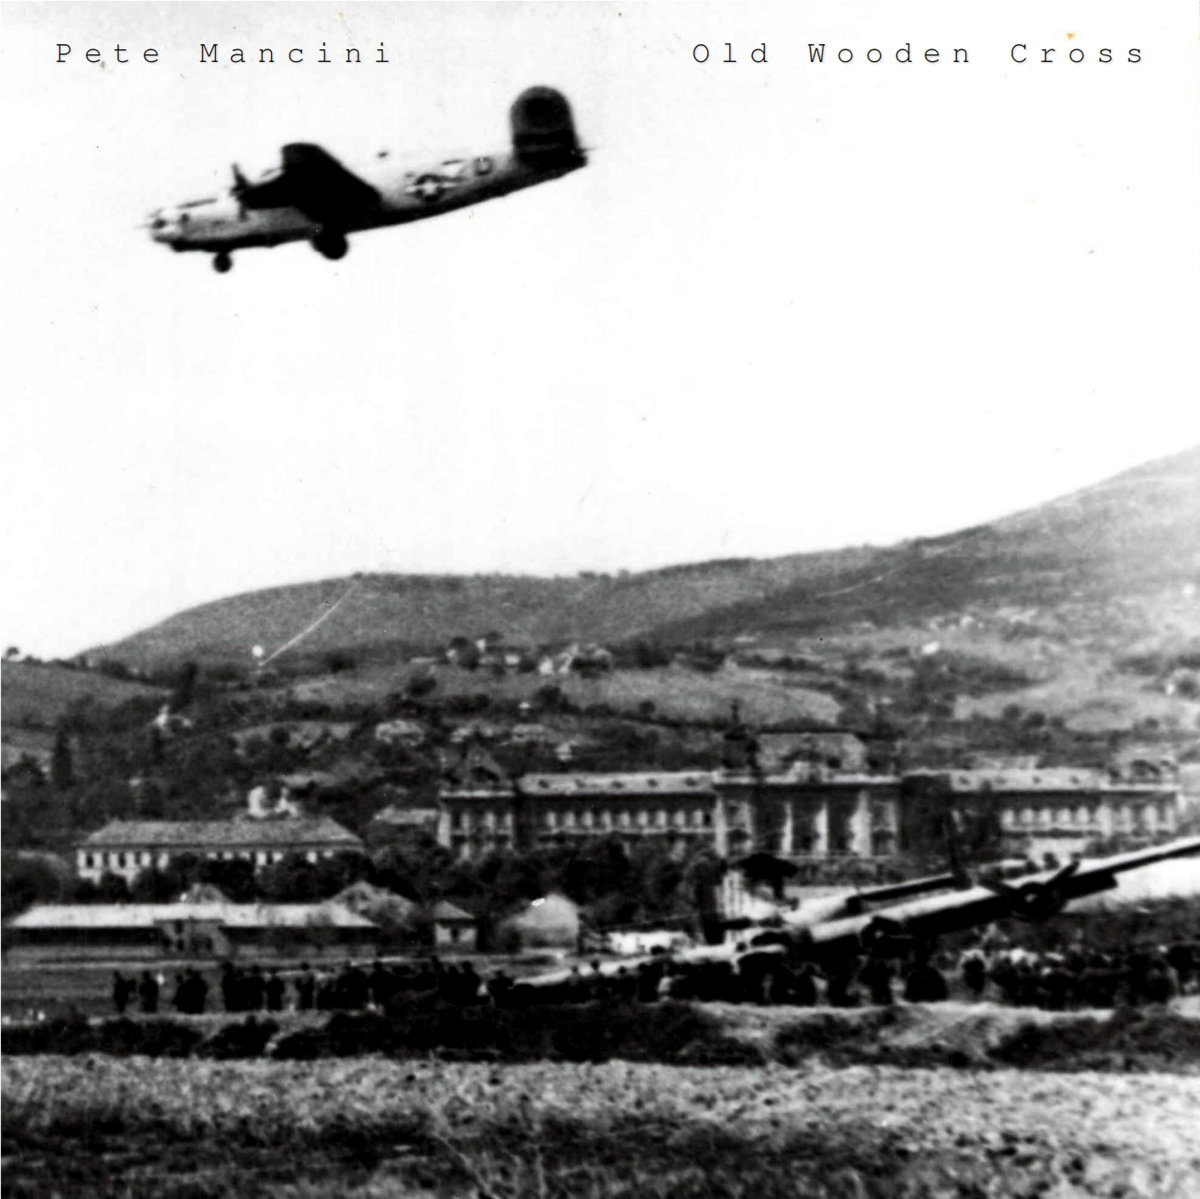 Black and white photo of a World War II era plane, descending over a town that looks to be likely based in Europe.